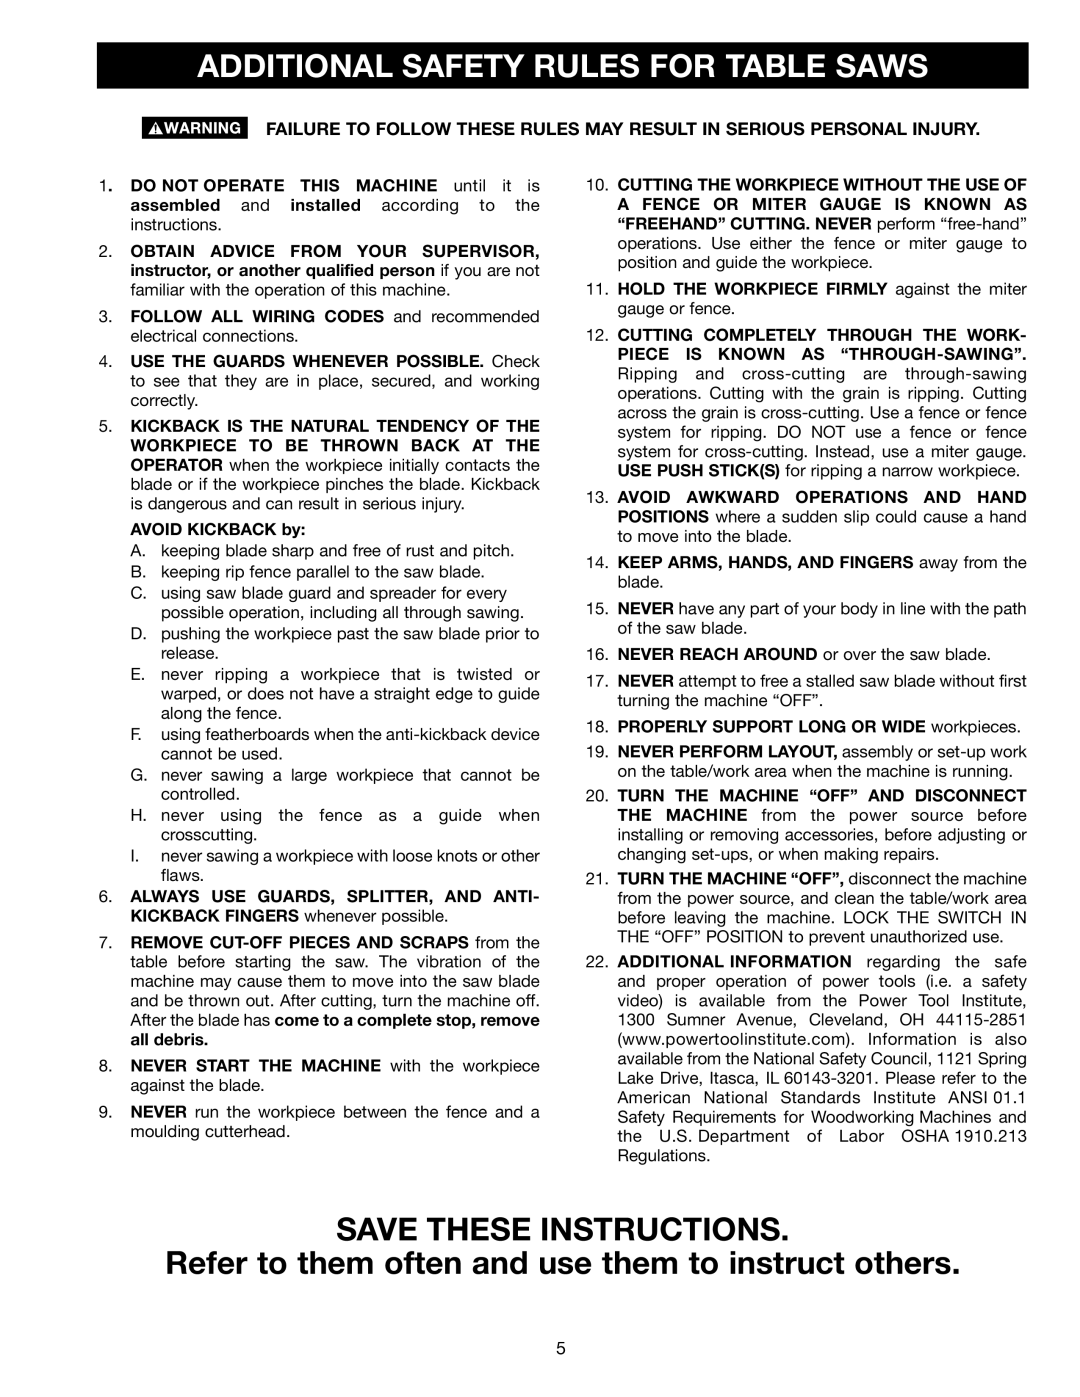 Porter-Cable 36-678, 36-649, 36-675 Additional Safety Rules For Table Saws, Save These Instructions, AVOID KICKBACK by 